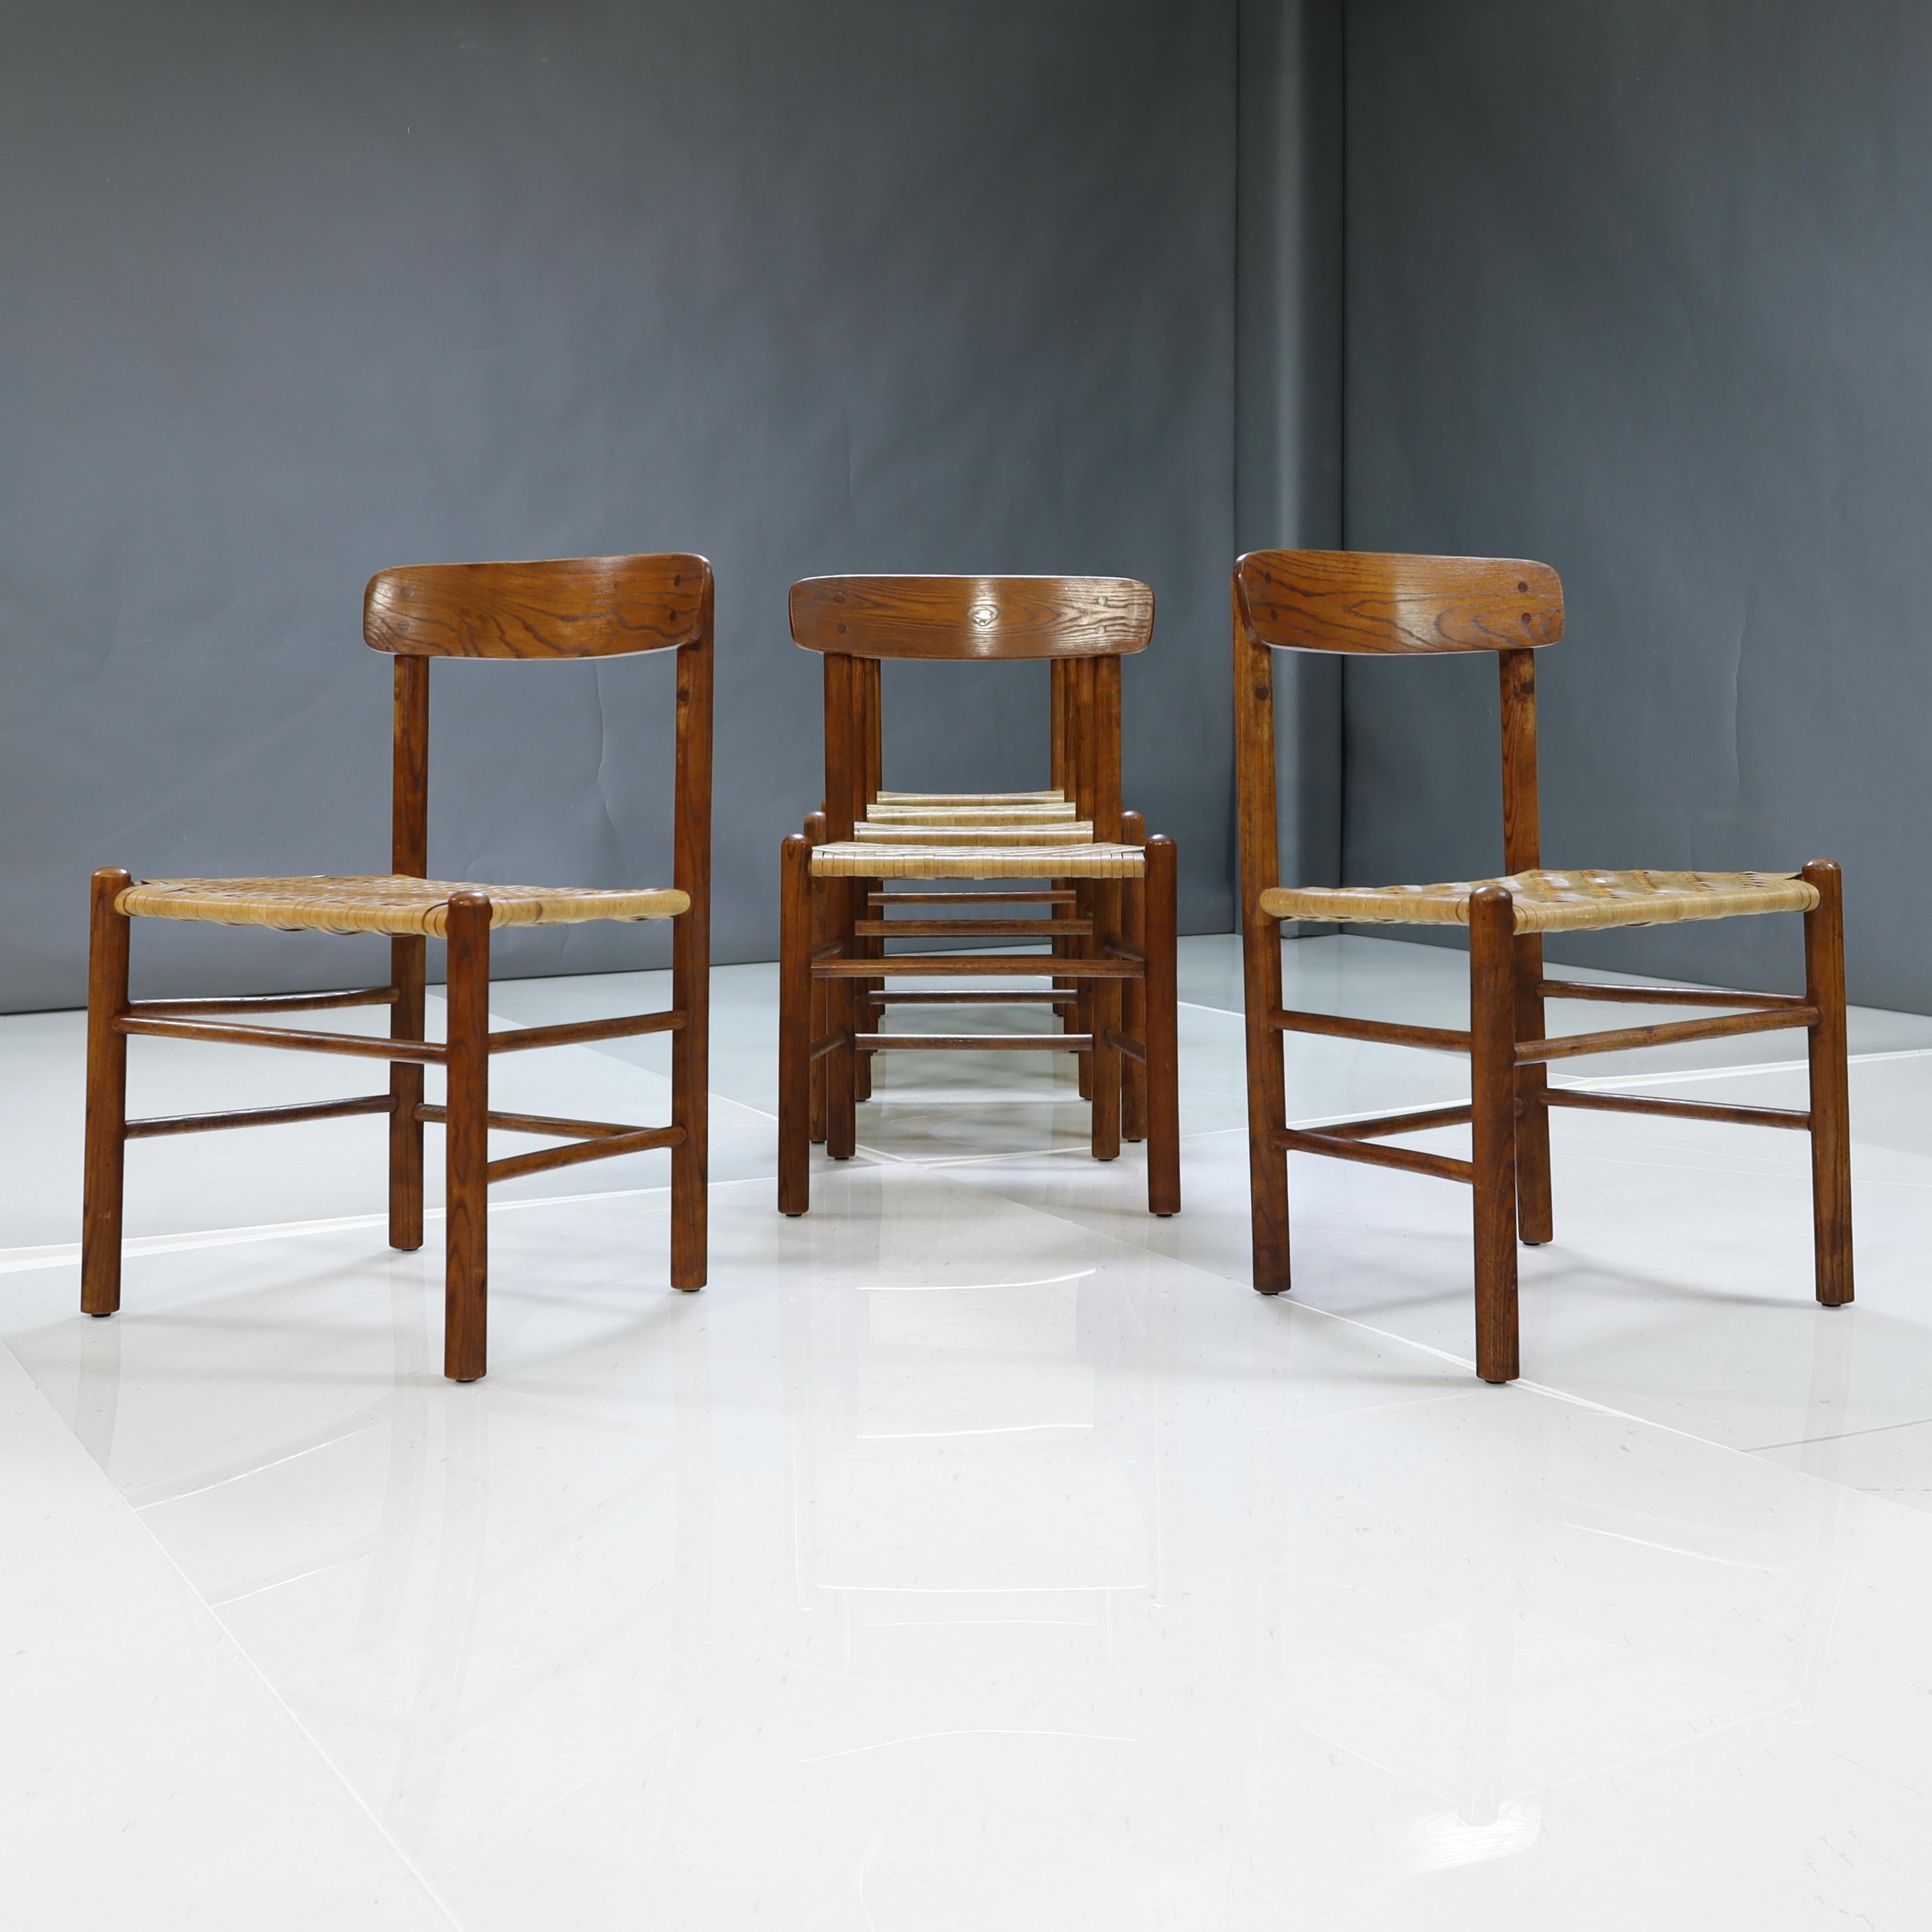 Introducing this Set of 6 Aged Oak Mid-Century Dining Chairs attributed to Børge Mogensen  Model J39. 

These chairs meant a lot to me when I brought them in.  It's been awhile since I've received such rich pieces speaking to so many years of